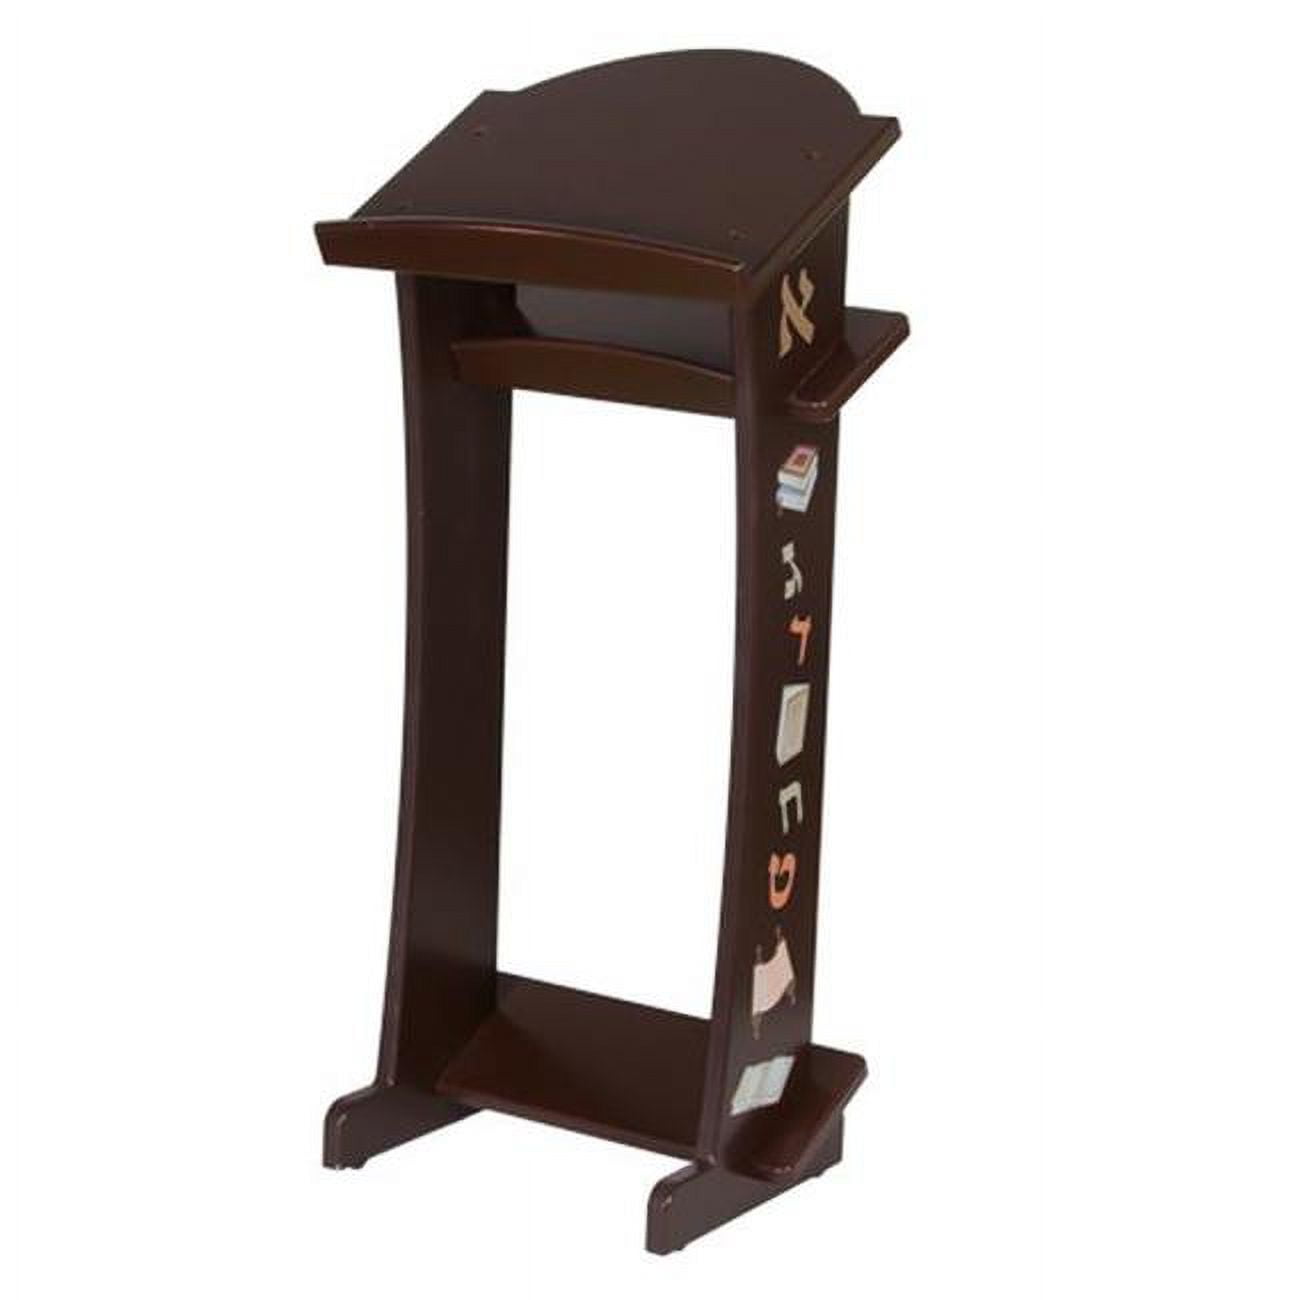 Picture of Art Judaica 43904A 32 x 14 x 11.8 in. Modular Mahogany Wooden Shtender for Children with Alef Beth Print Assembled